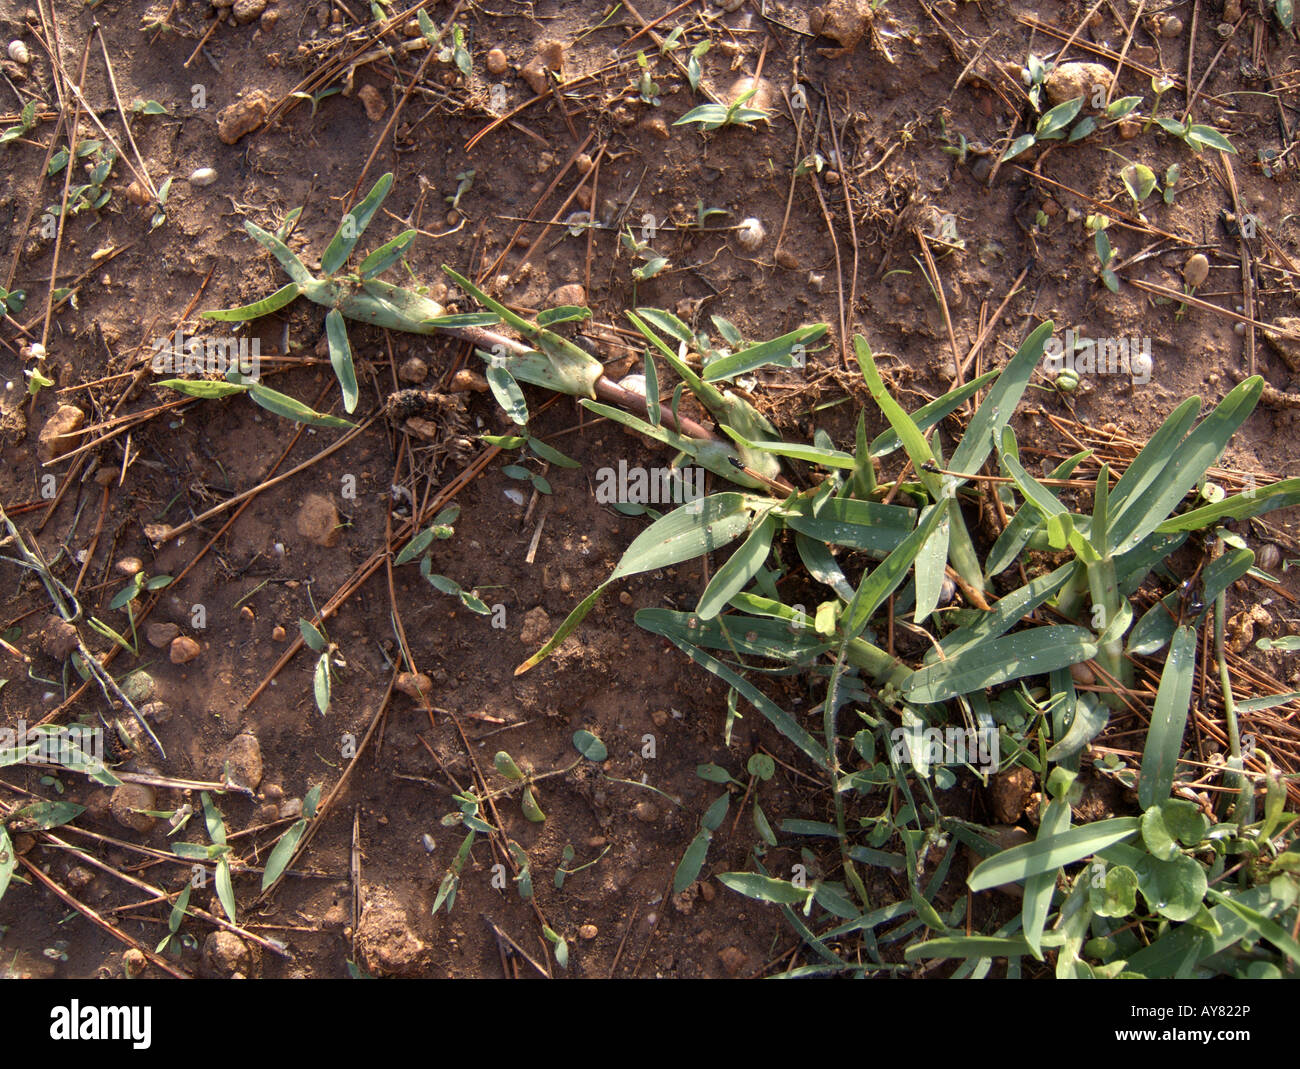 Lawn of couch grass 'Elytrigia repens' (Synonyms: 'Triticum repens L', 'Agropyron repens', 'P Beauv', 'Elymus repens L Gould') Stock Photo